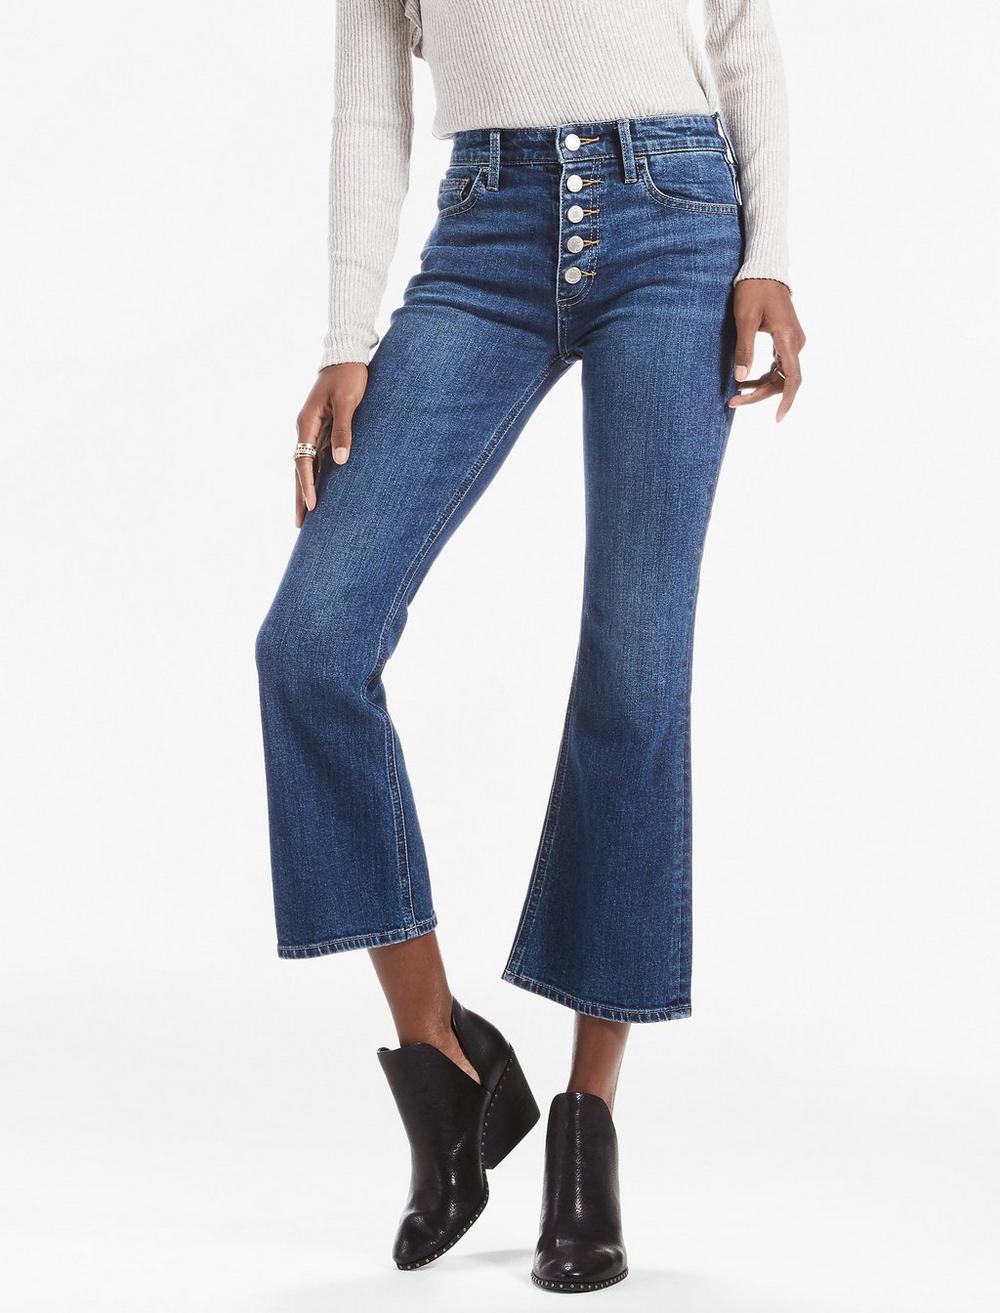 BRIDGETTE CROP FLARE JEAN WITH EXPOSED BUTTON FLY, image 1